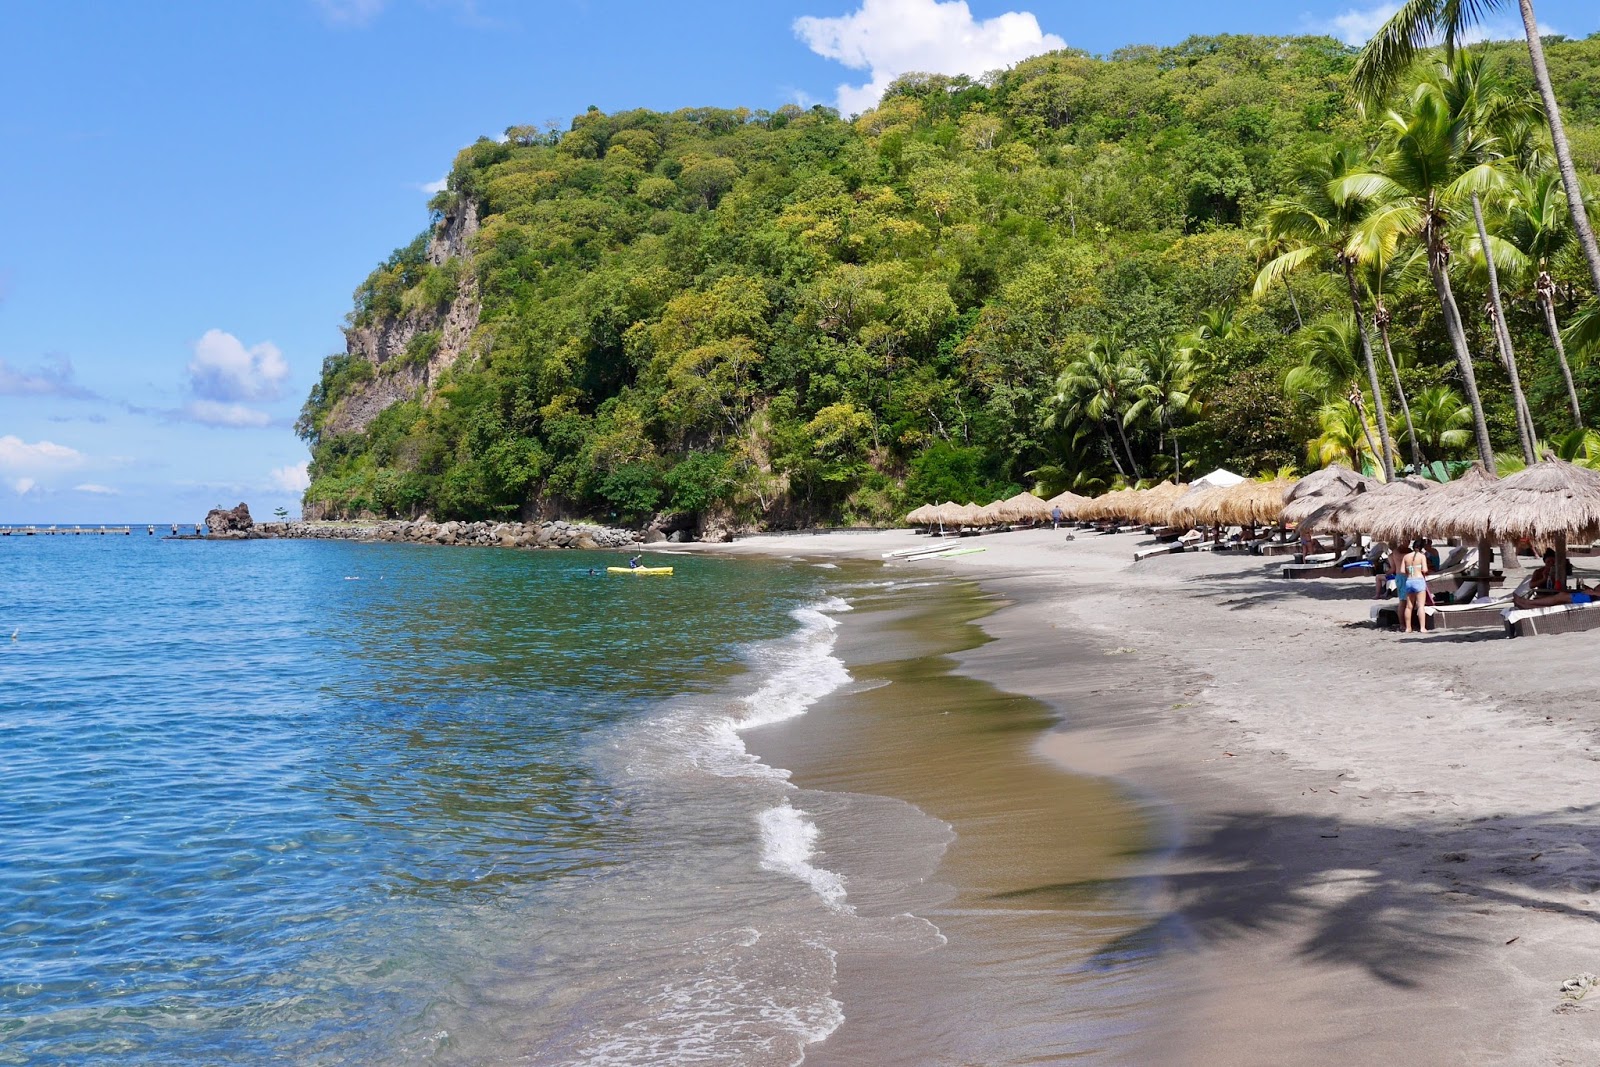 Anse Chastanet beach, Soufrière, St Lucia by www.CalMcTravels.com